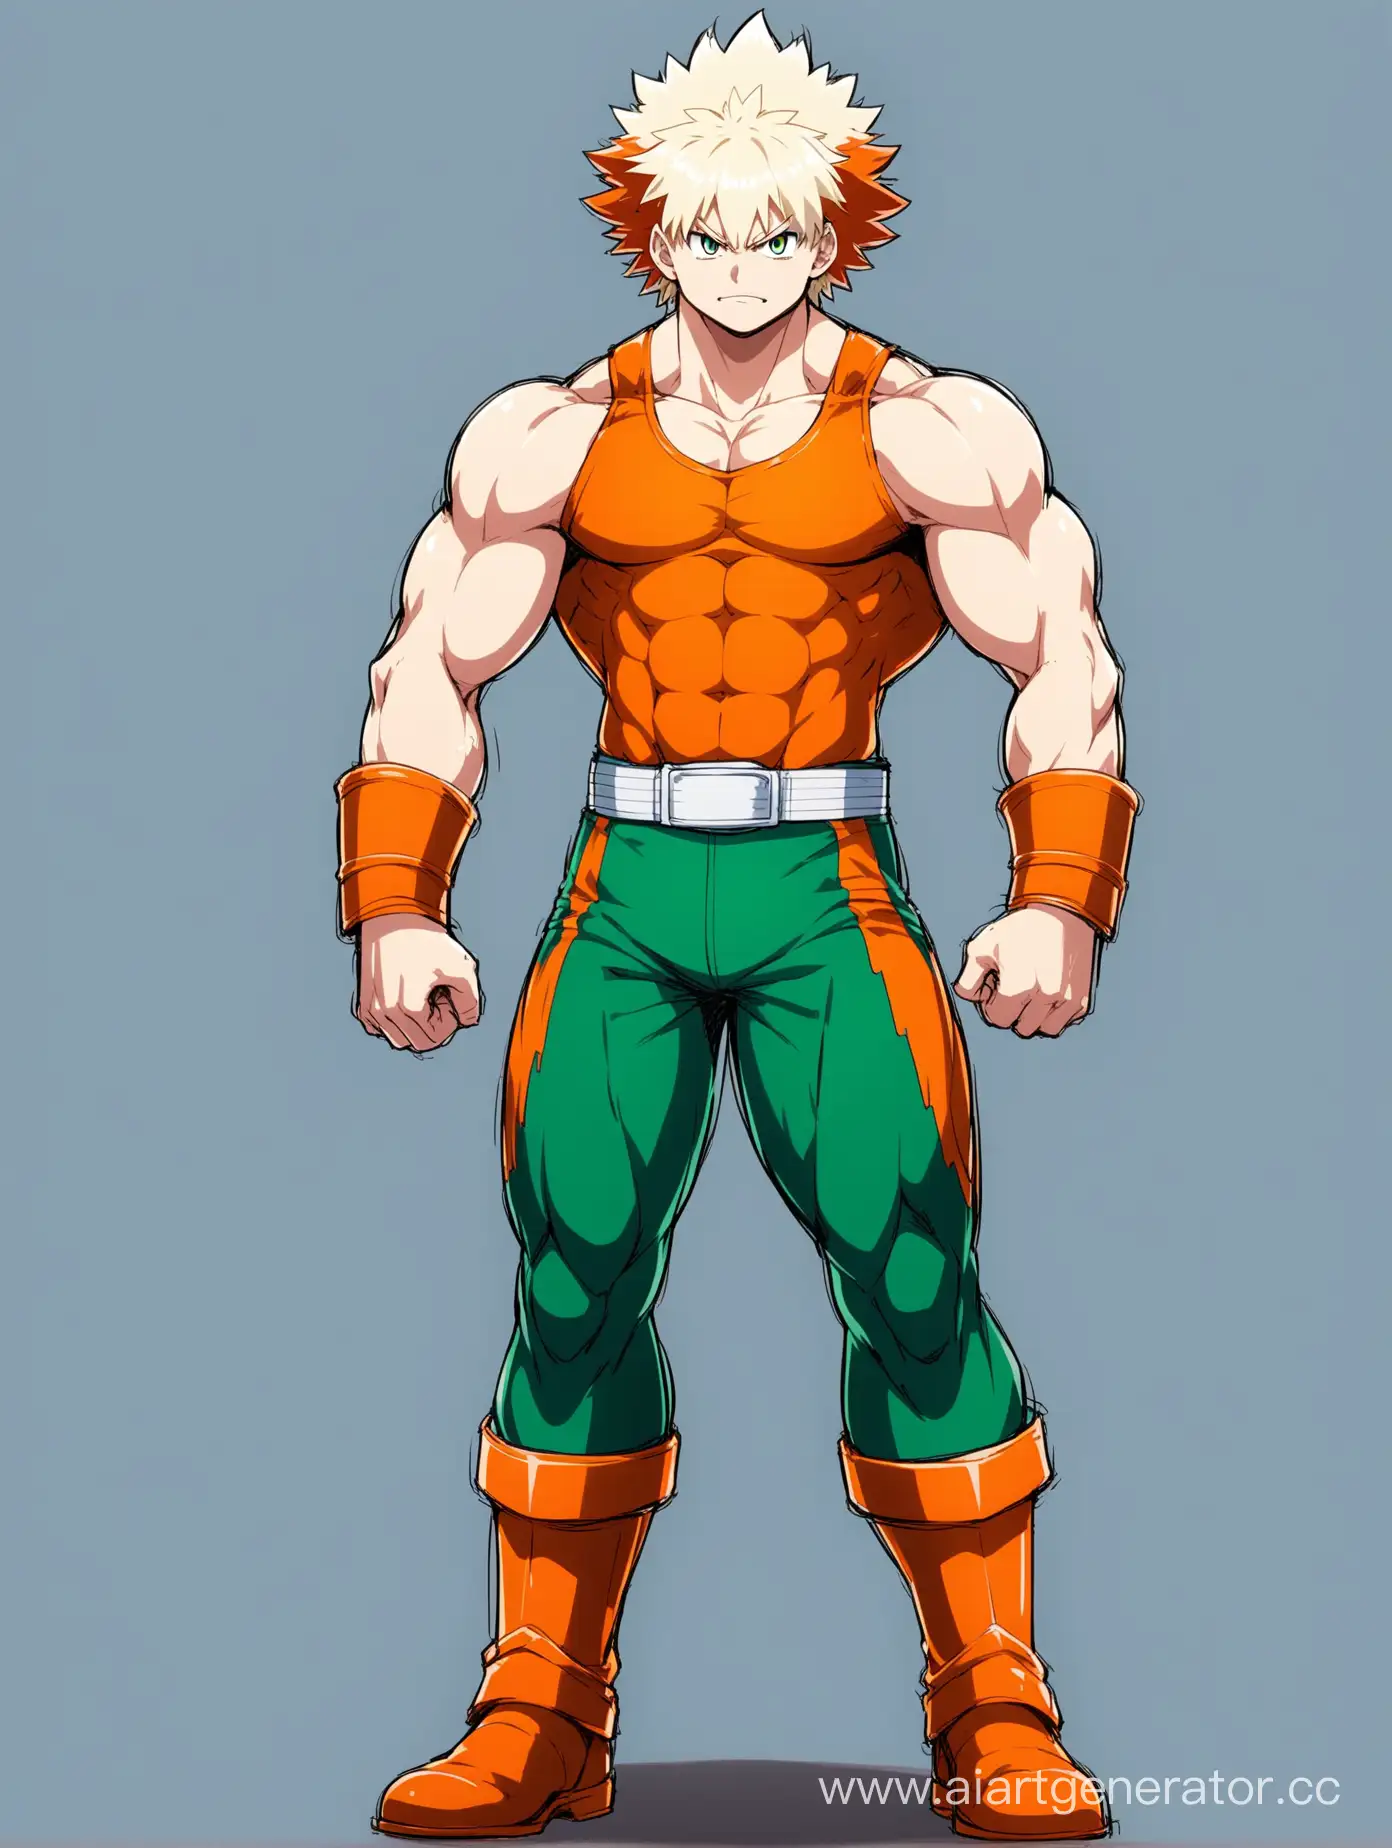 Bakugo-from-My-Hero-Academia-Flexing-Muscles-in-Full-Height